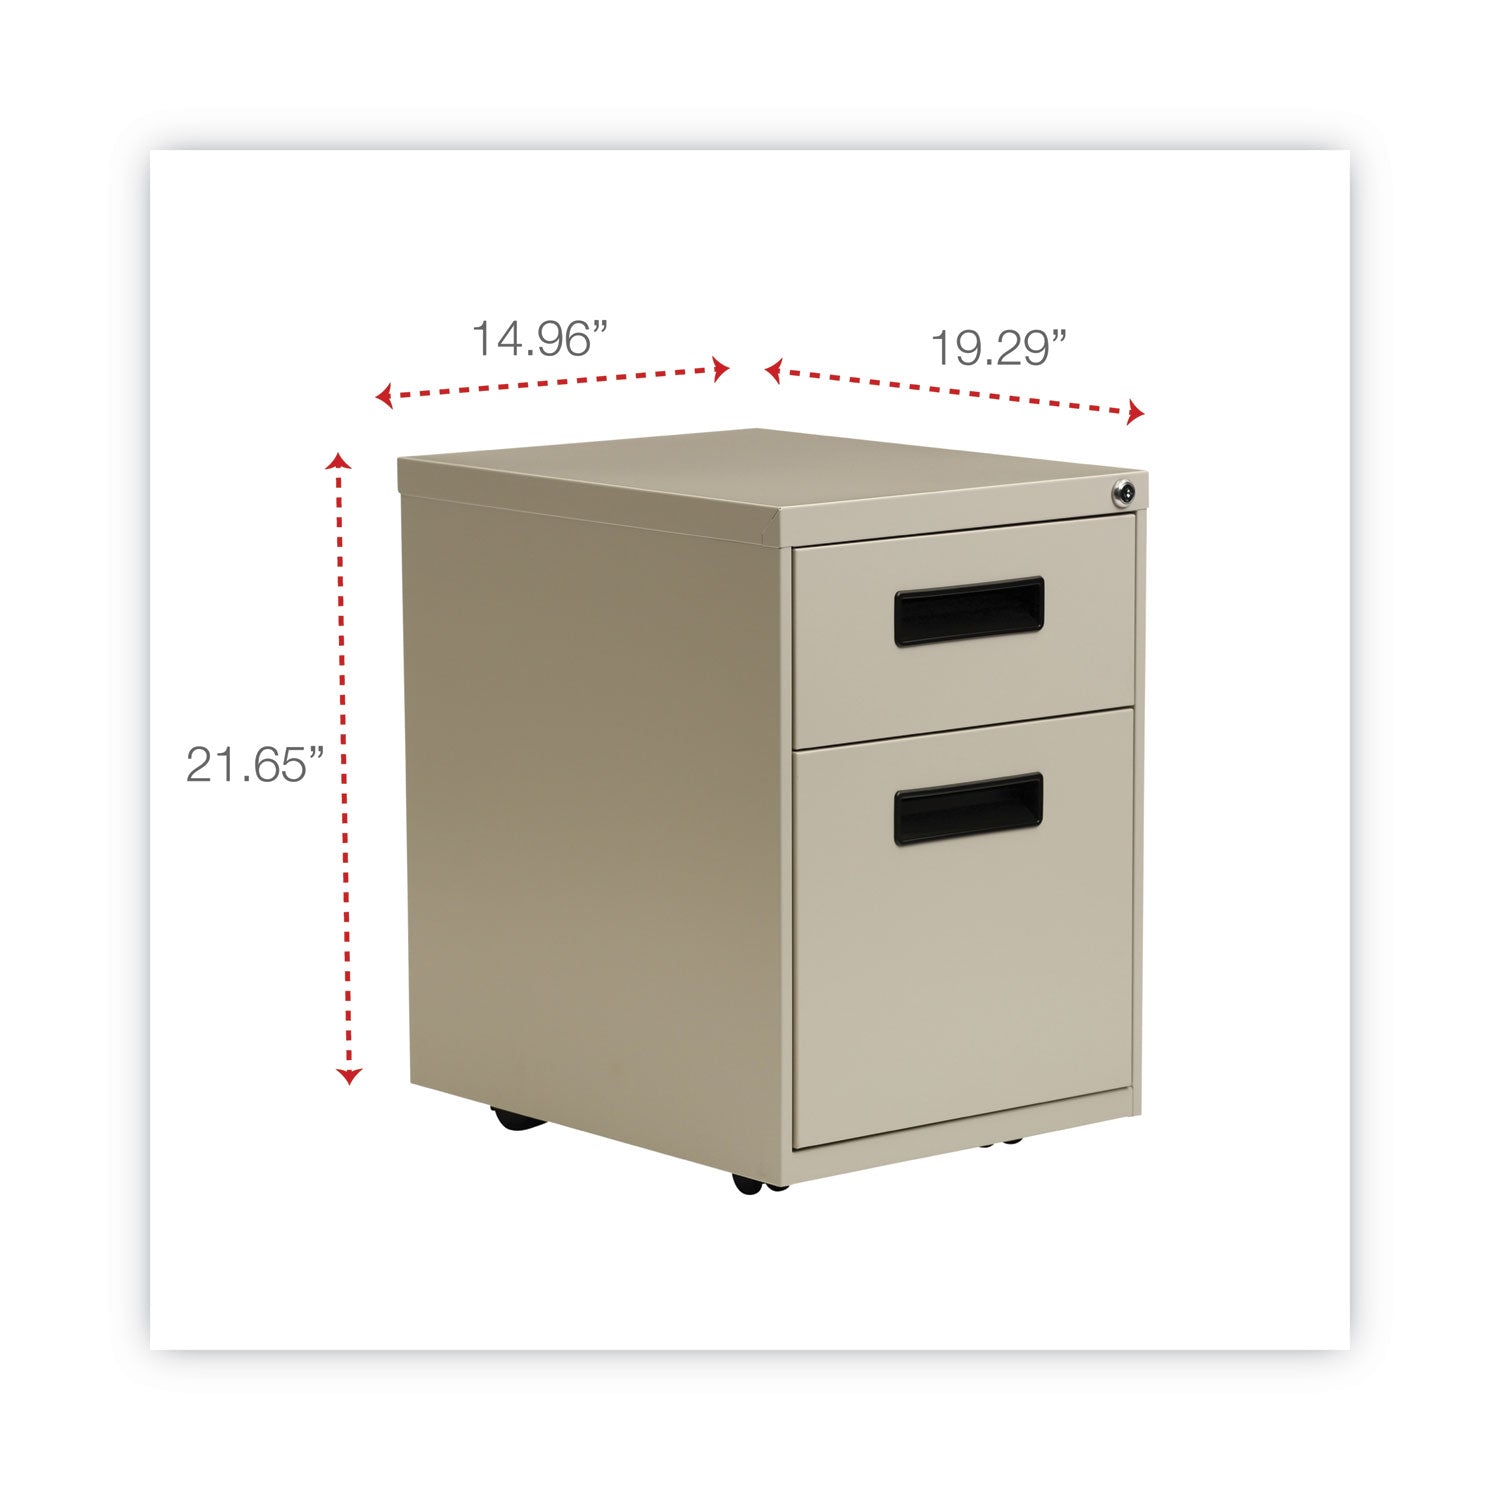 file-pedestal-left-or-right-2-drawers-box-file-legal-letter-putty-1496-x-1929-x-2165_alepabfpy - 3